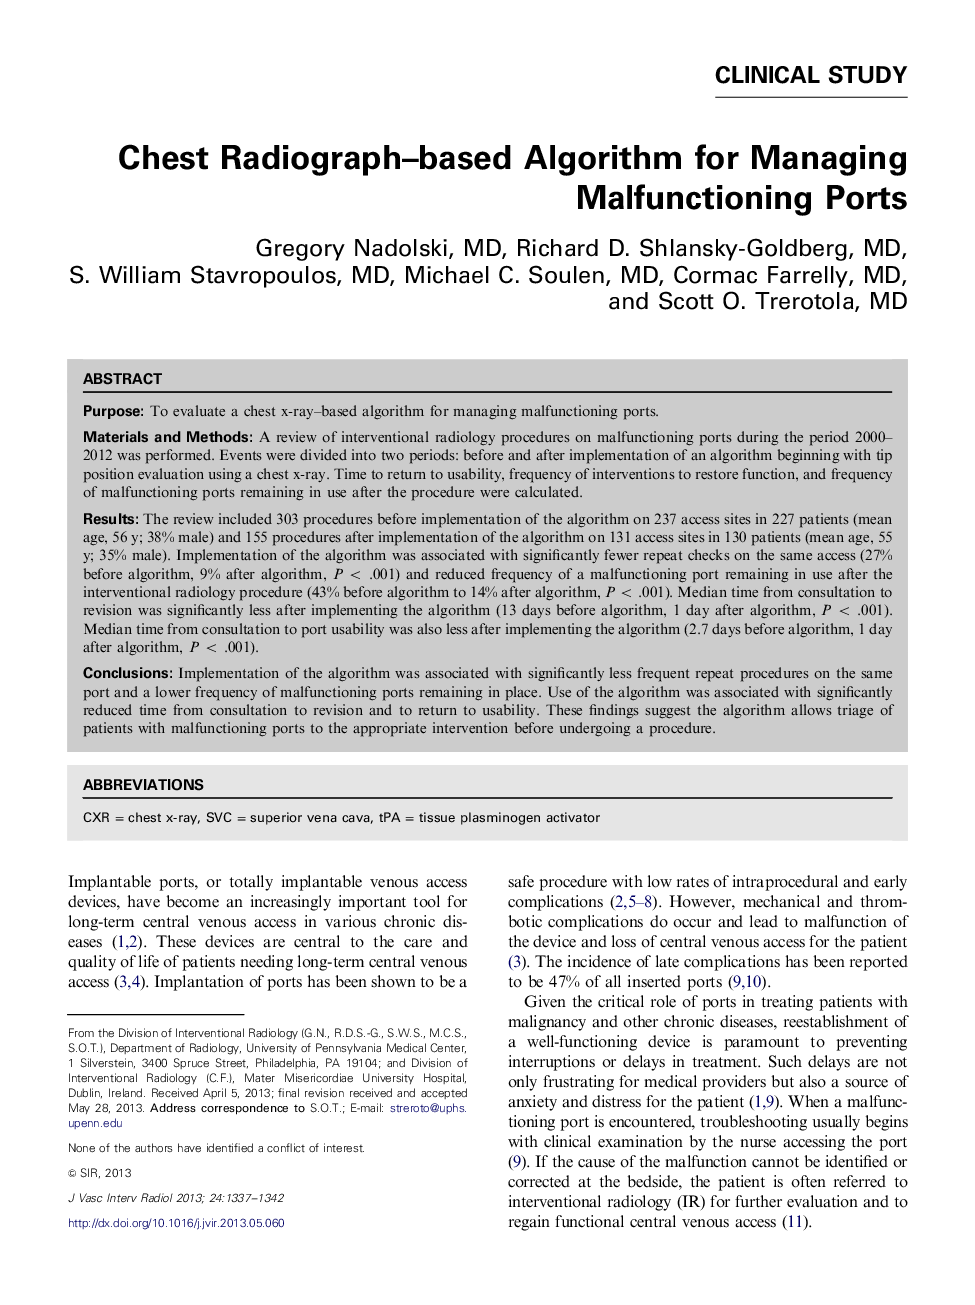 Chest Radiograph-based Algorithm for Managing Malfunctioning Ports